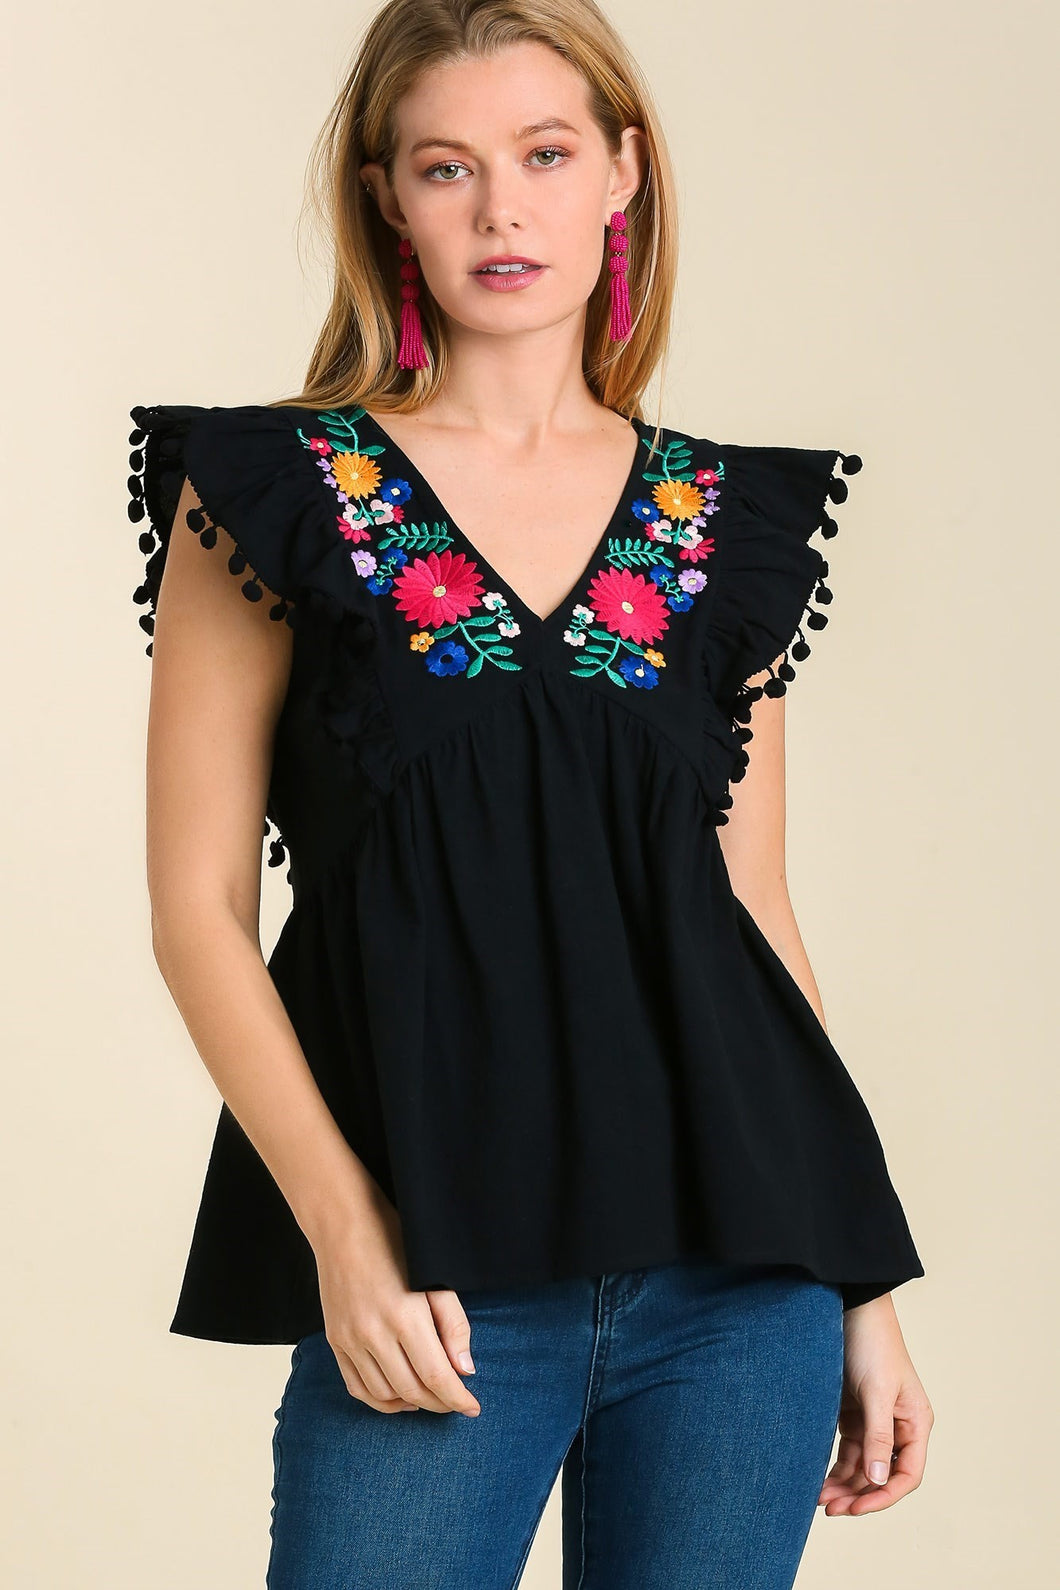 Umgee Floral Embroidery Top with Pom Pom Details in Black  Umgee   